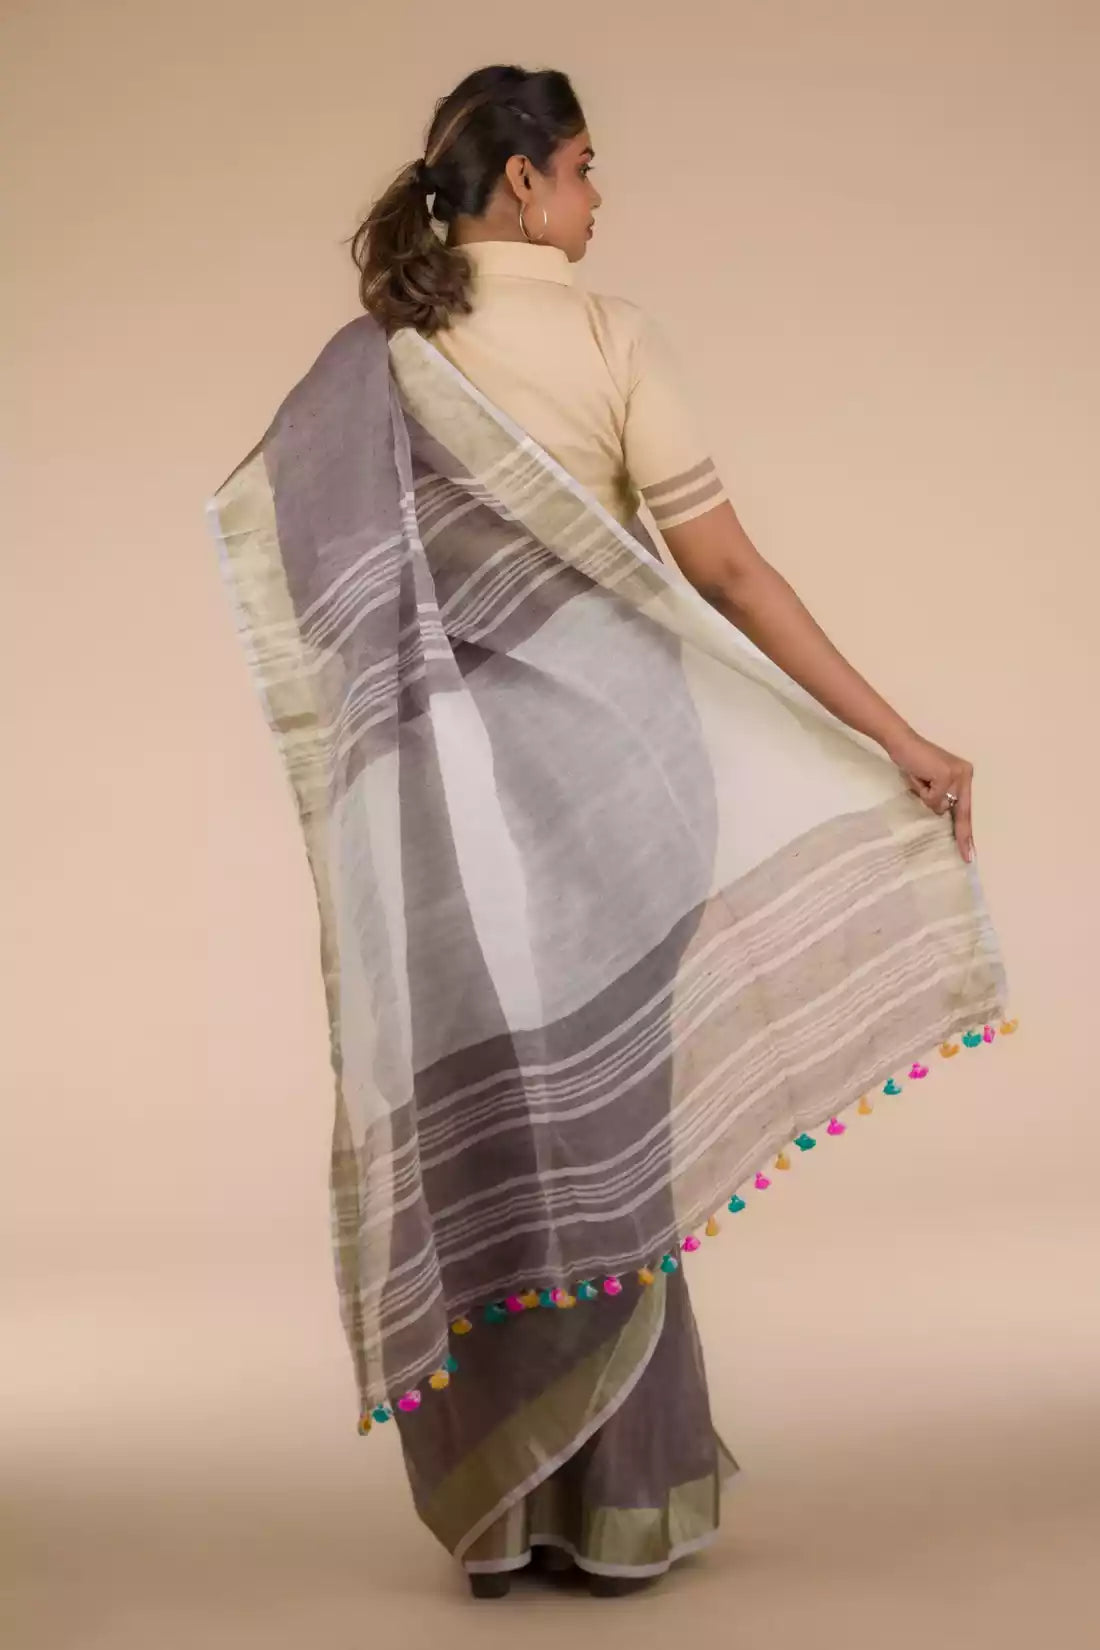 back view of a woman posing in an ethnic grey saree with tie top blouse, flaunting loose end of her saree